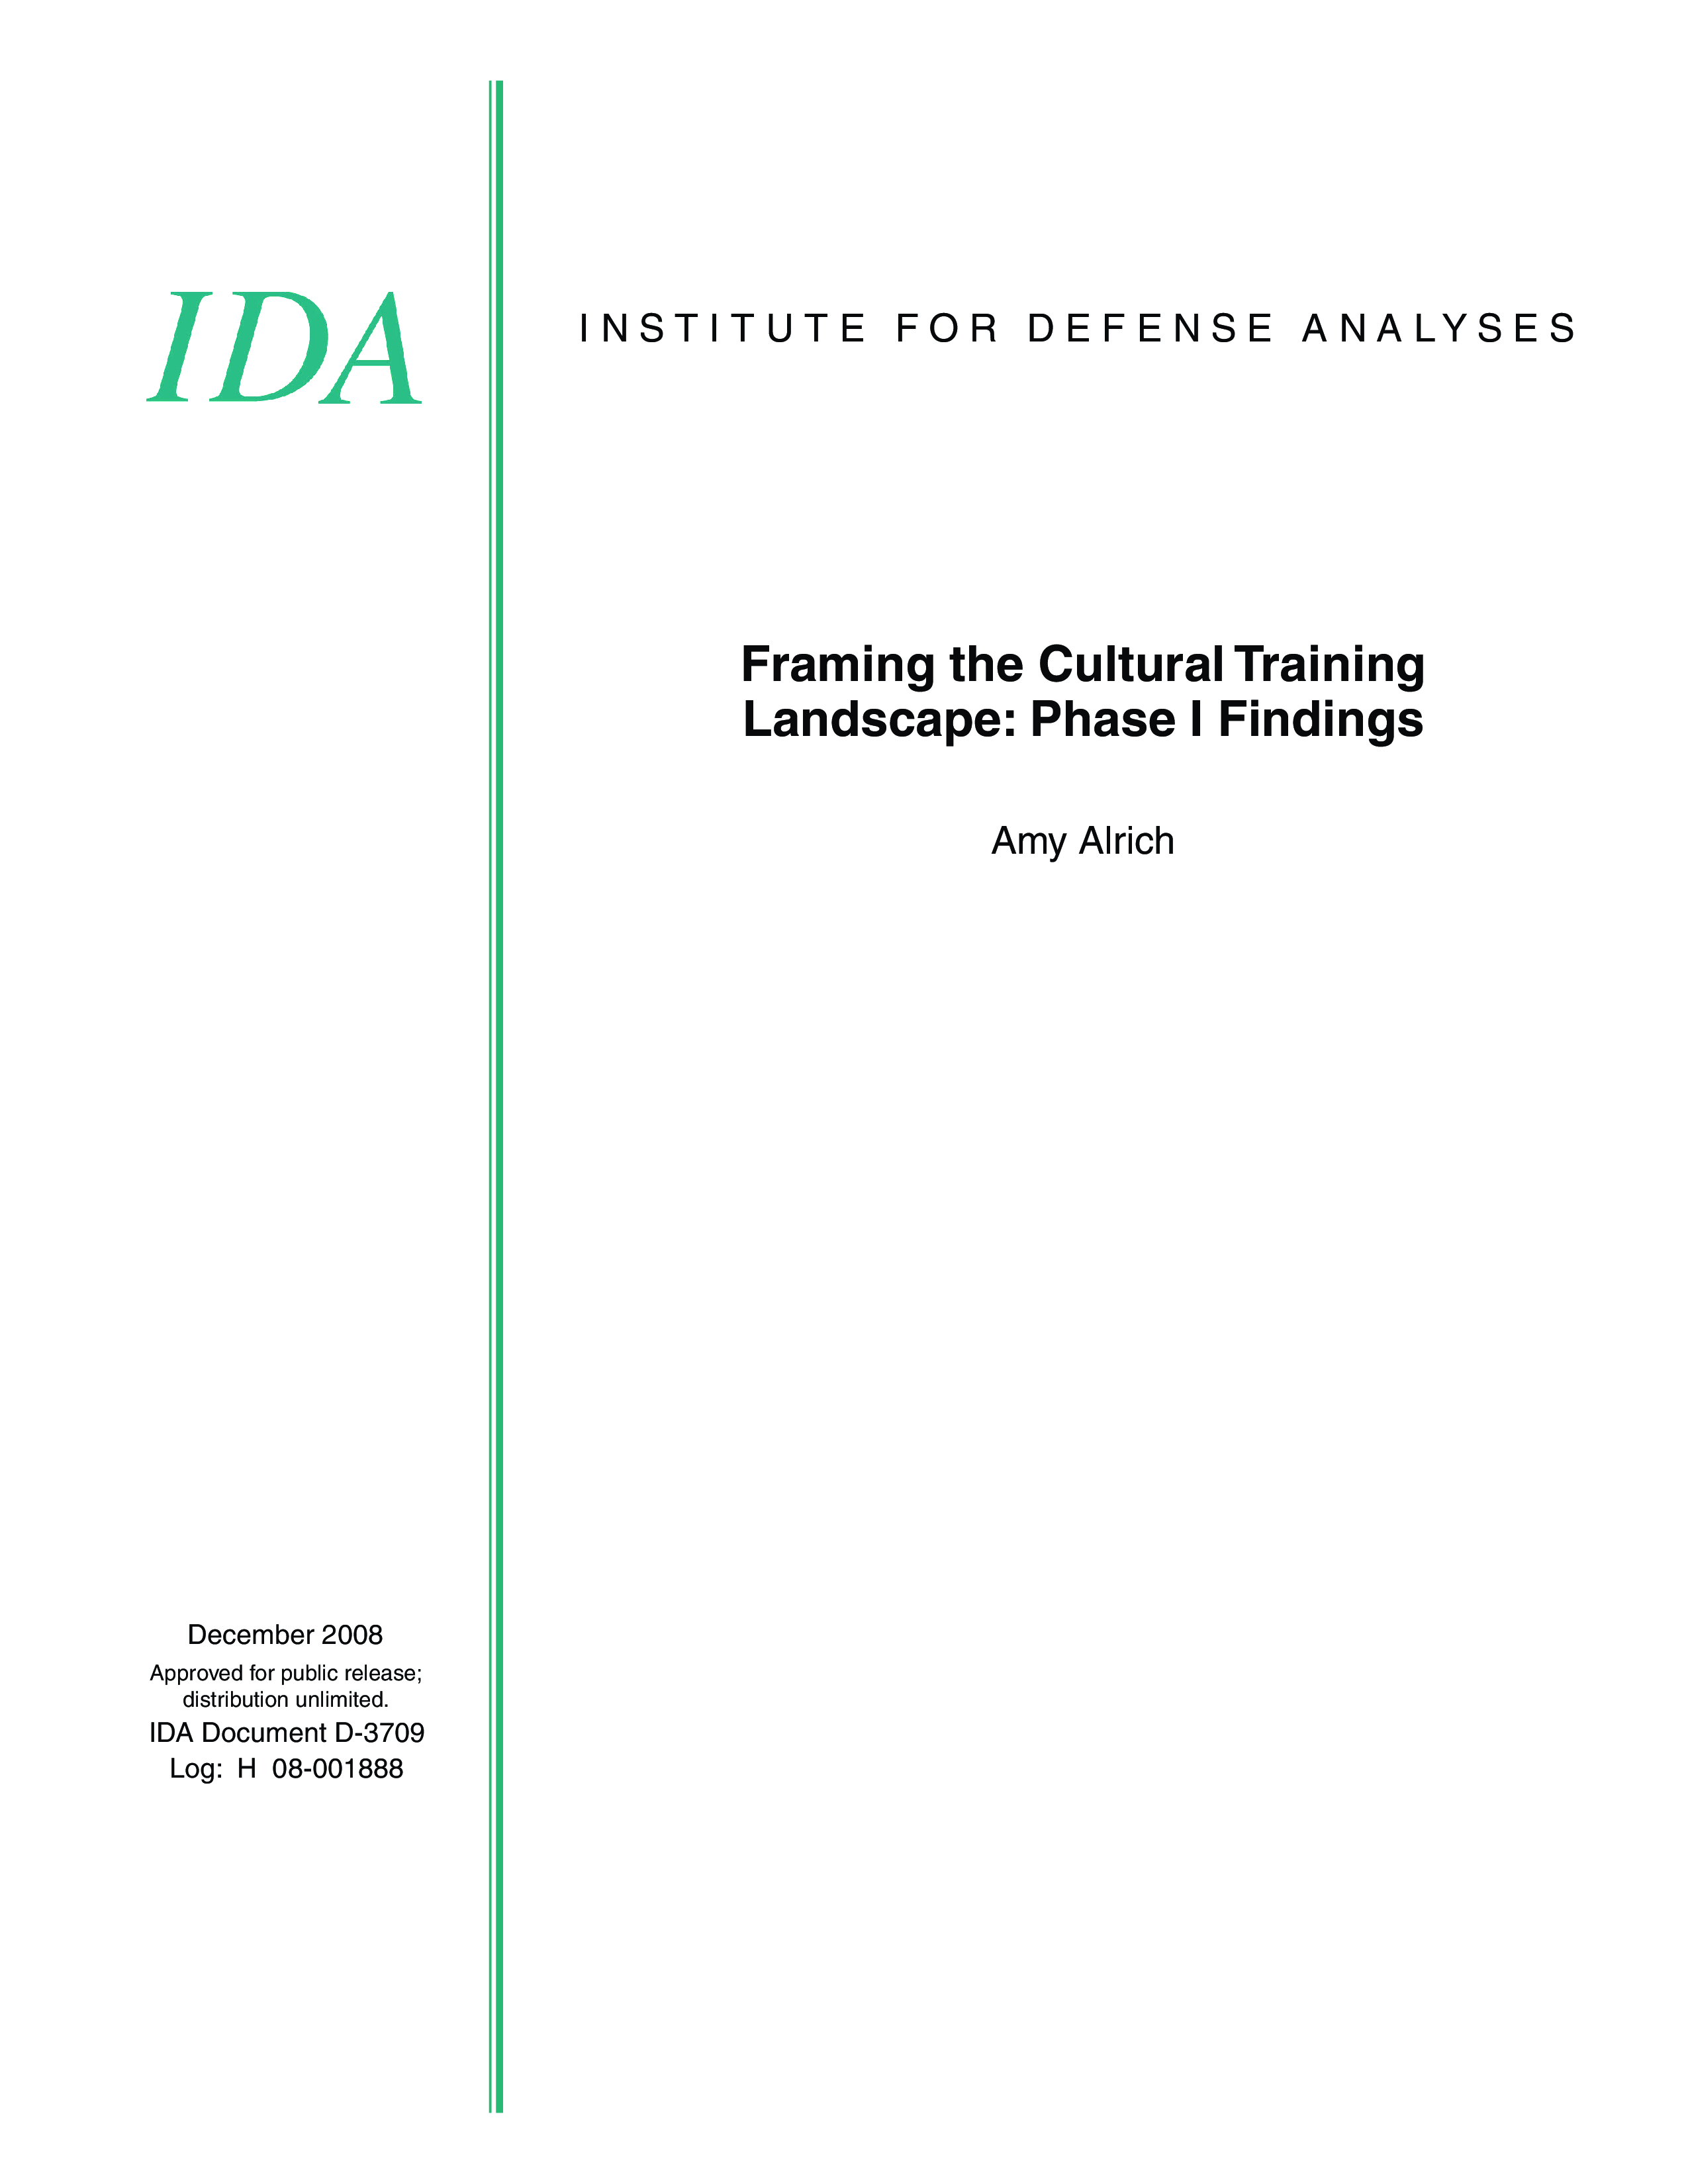 Framing the Cultural Training Landscape: Phase I Findings